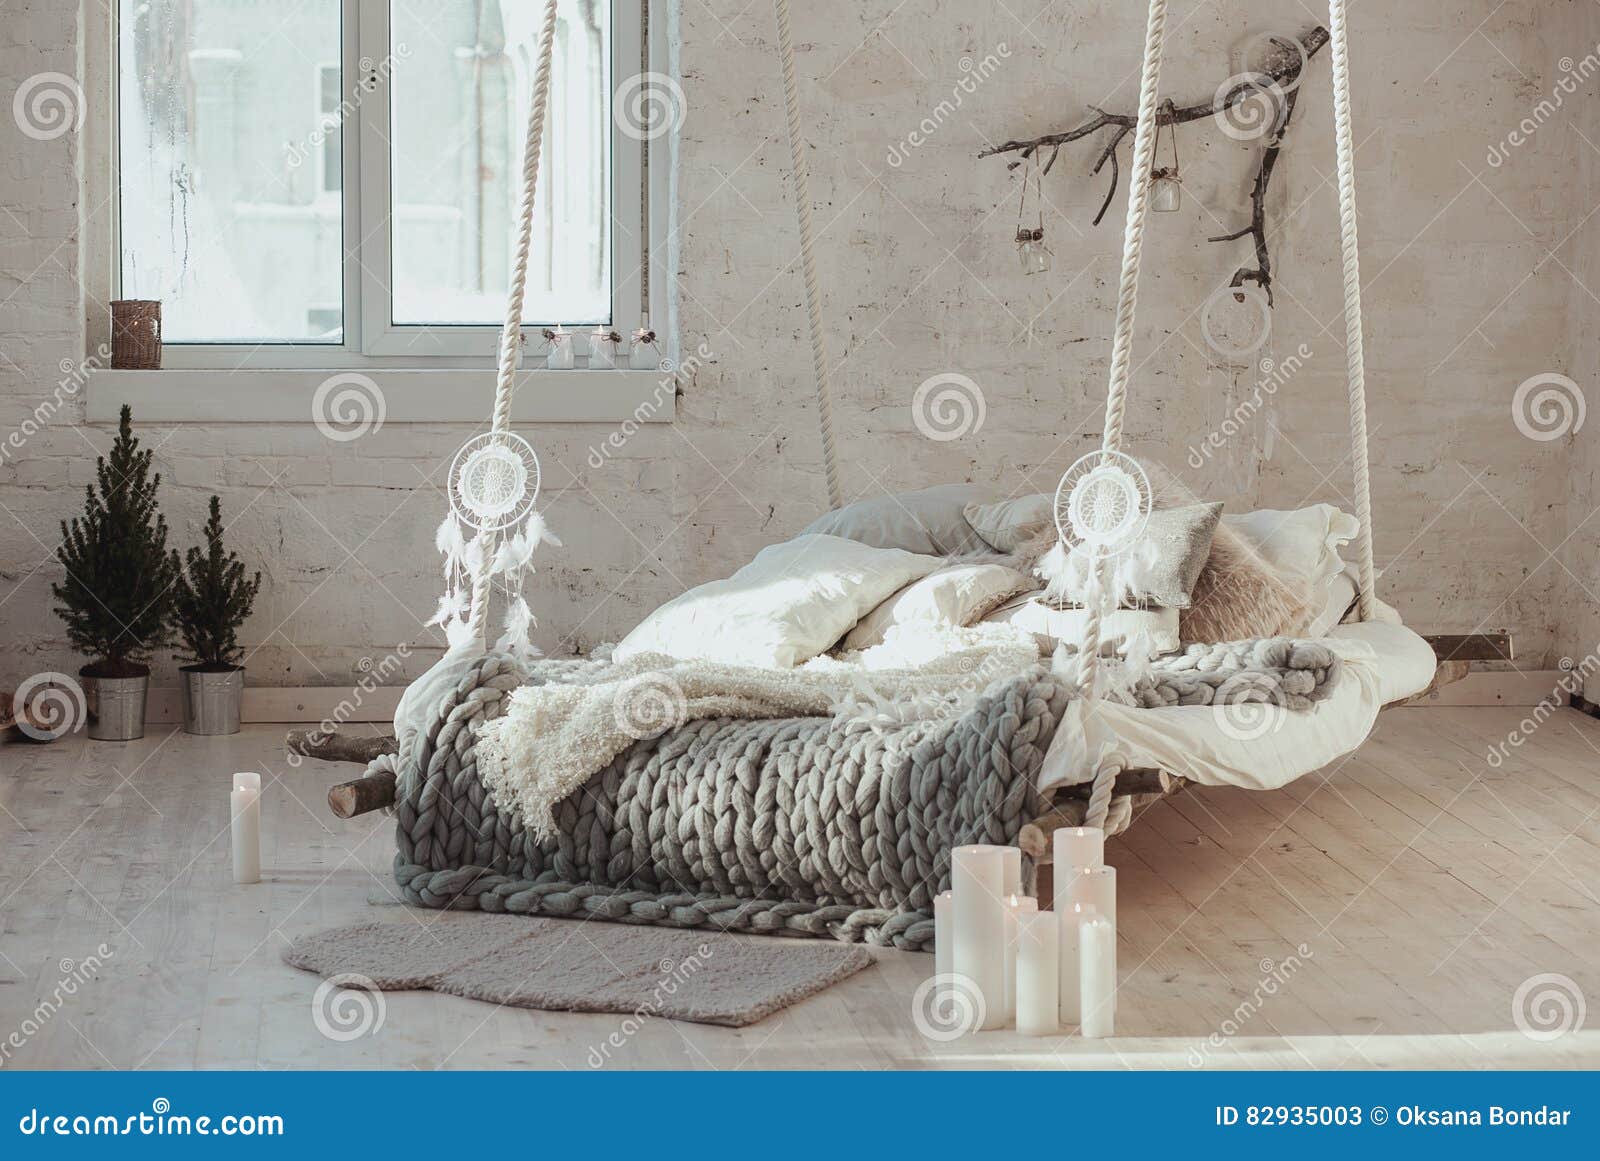 The Bed Suspended From The Ceiling Grey Big Cozy Blanket